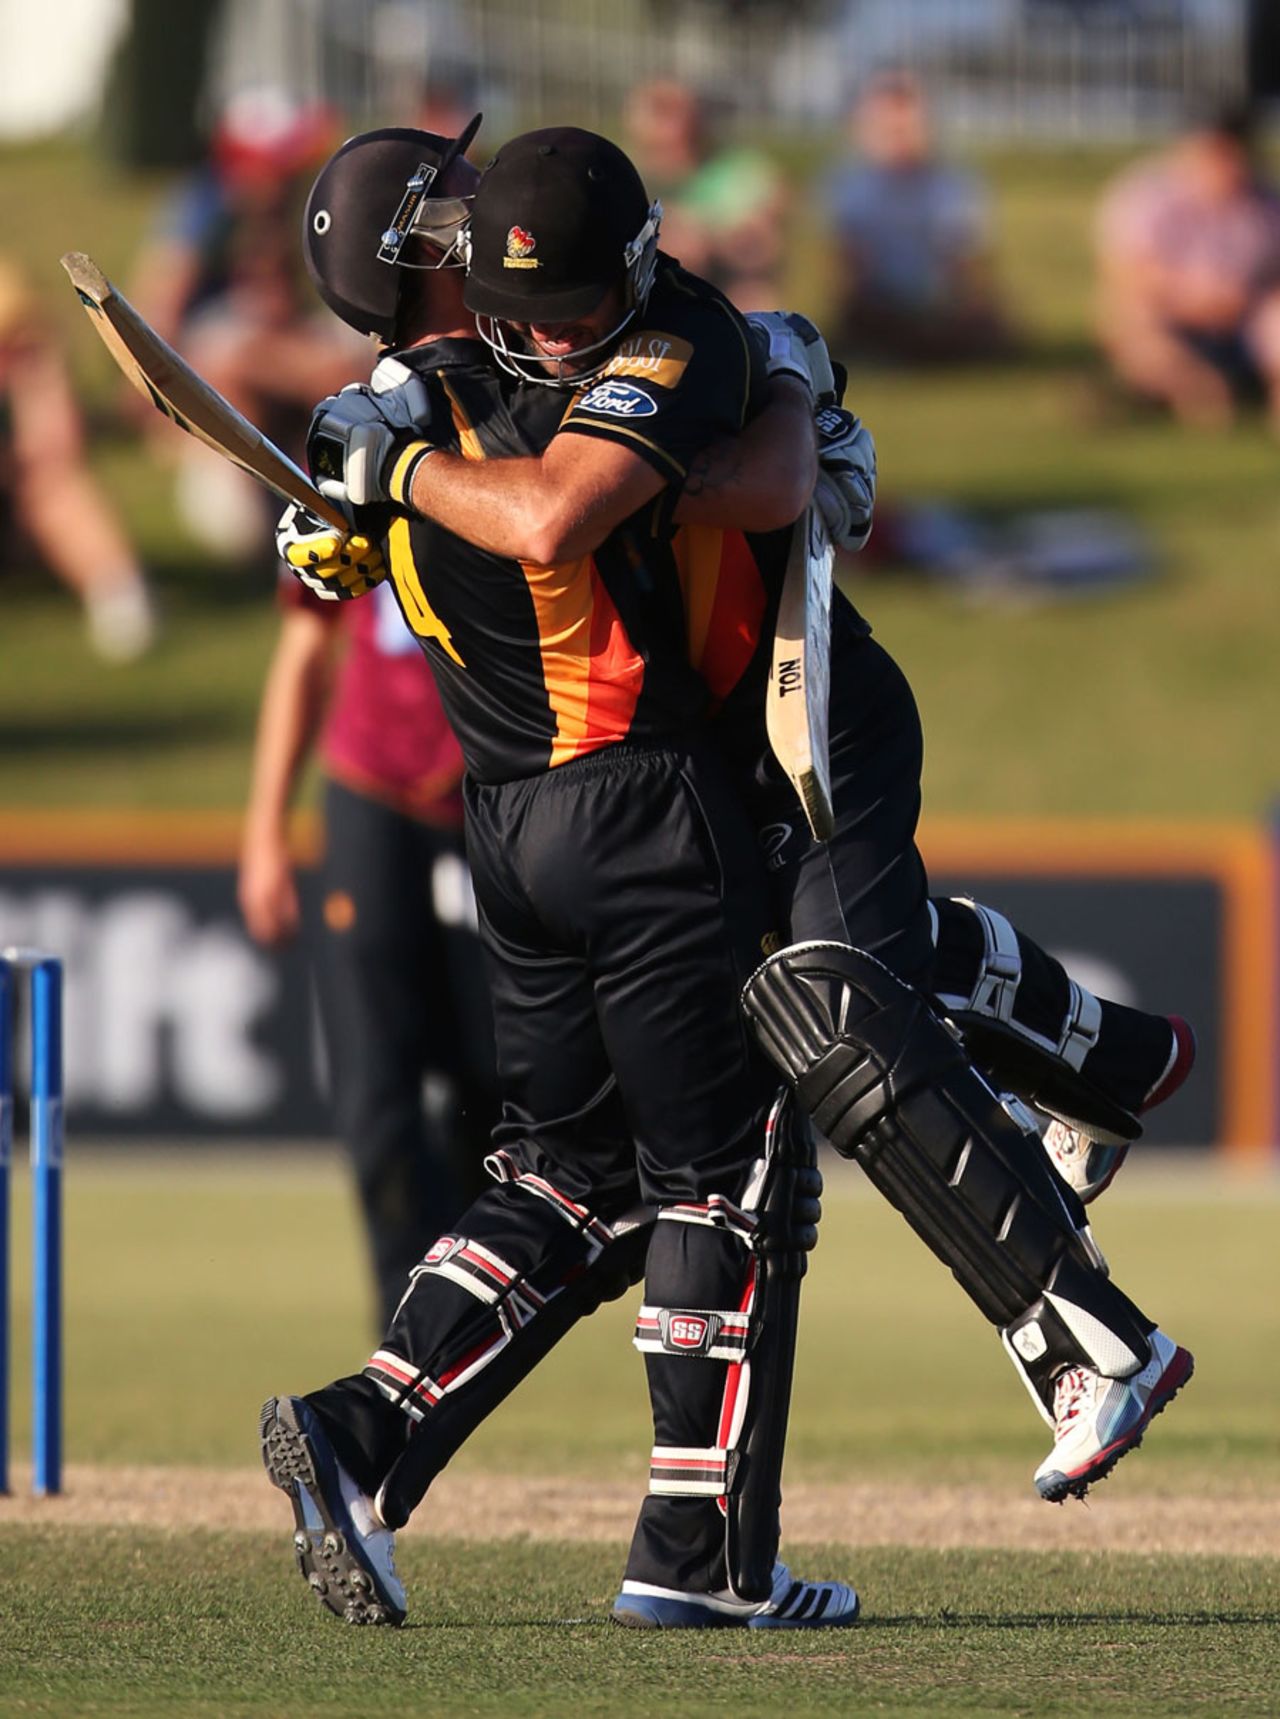 Luke Ronchi and Luke Woodcock celebrate the winning runs, Northern Districts v Wellington, The Ford Trophy final, Mount Maunganui, April 5, 2014